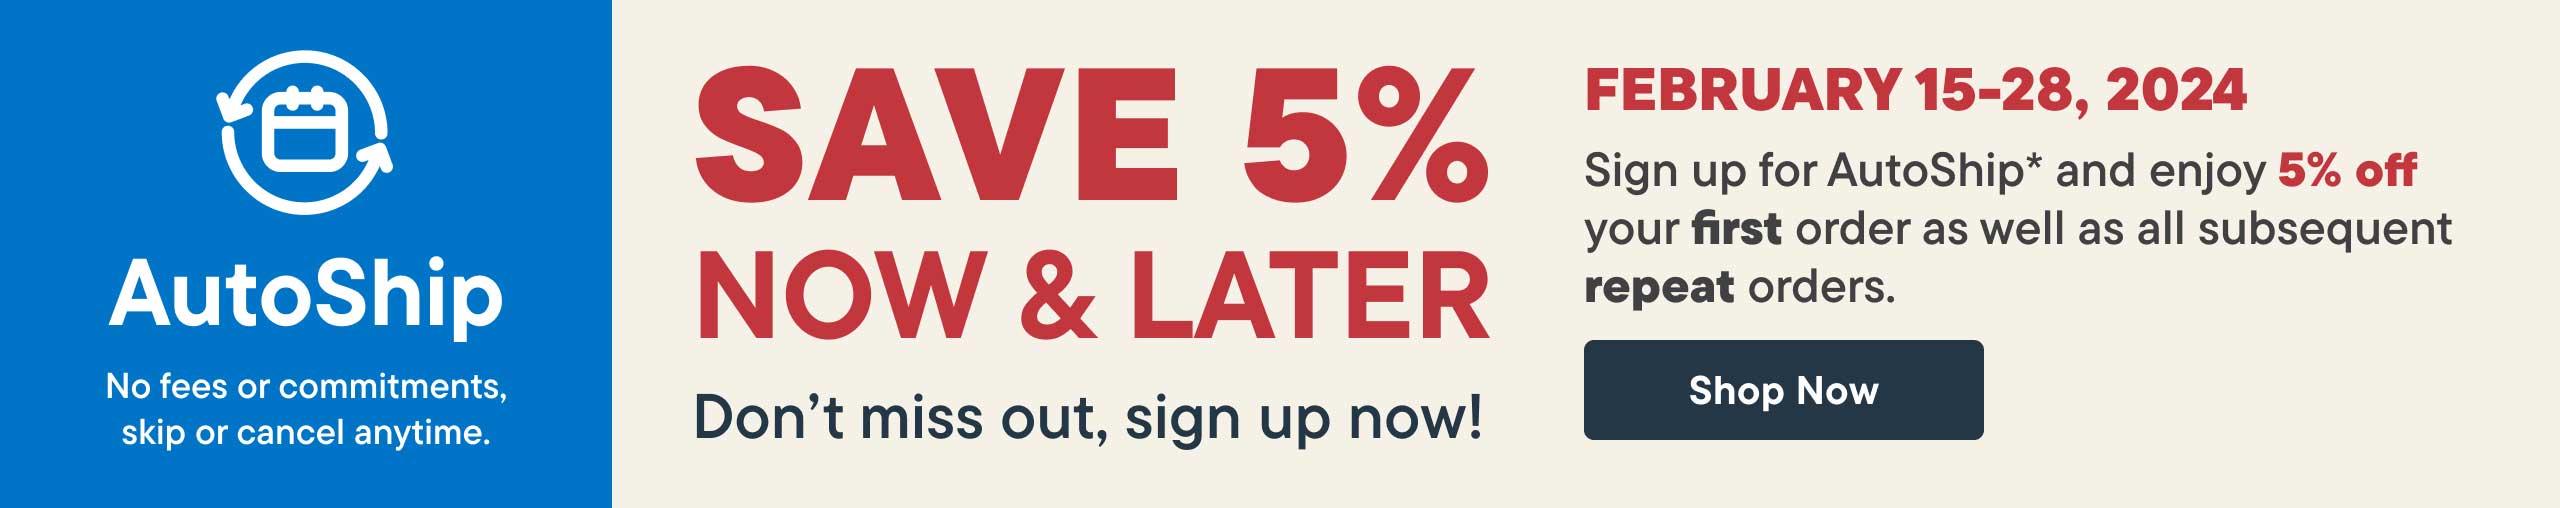 Sign up for AutoShip - Save 5% now, save 5% later.